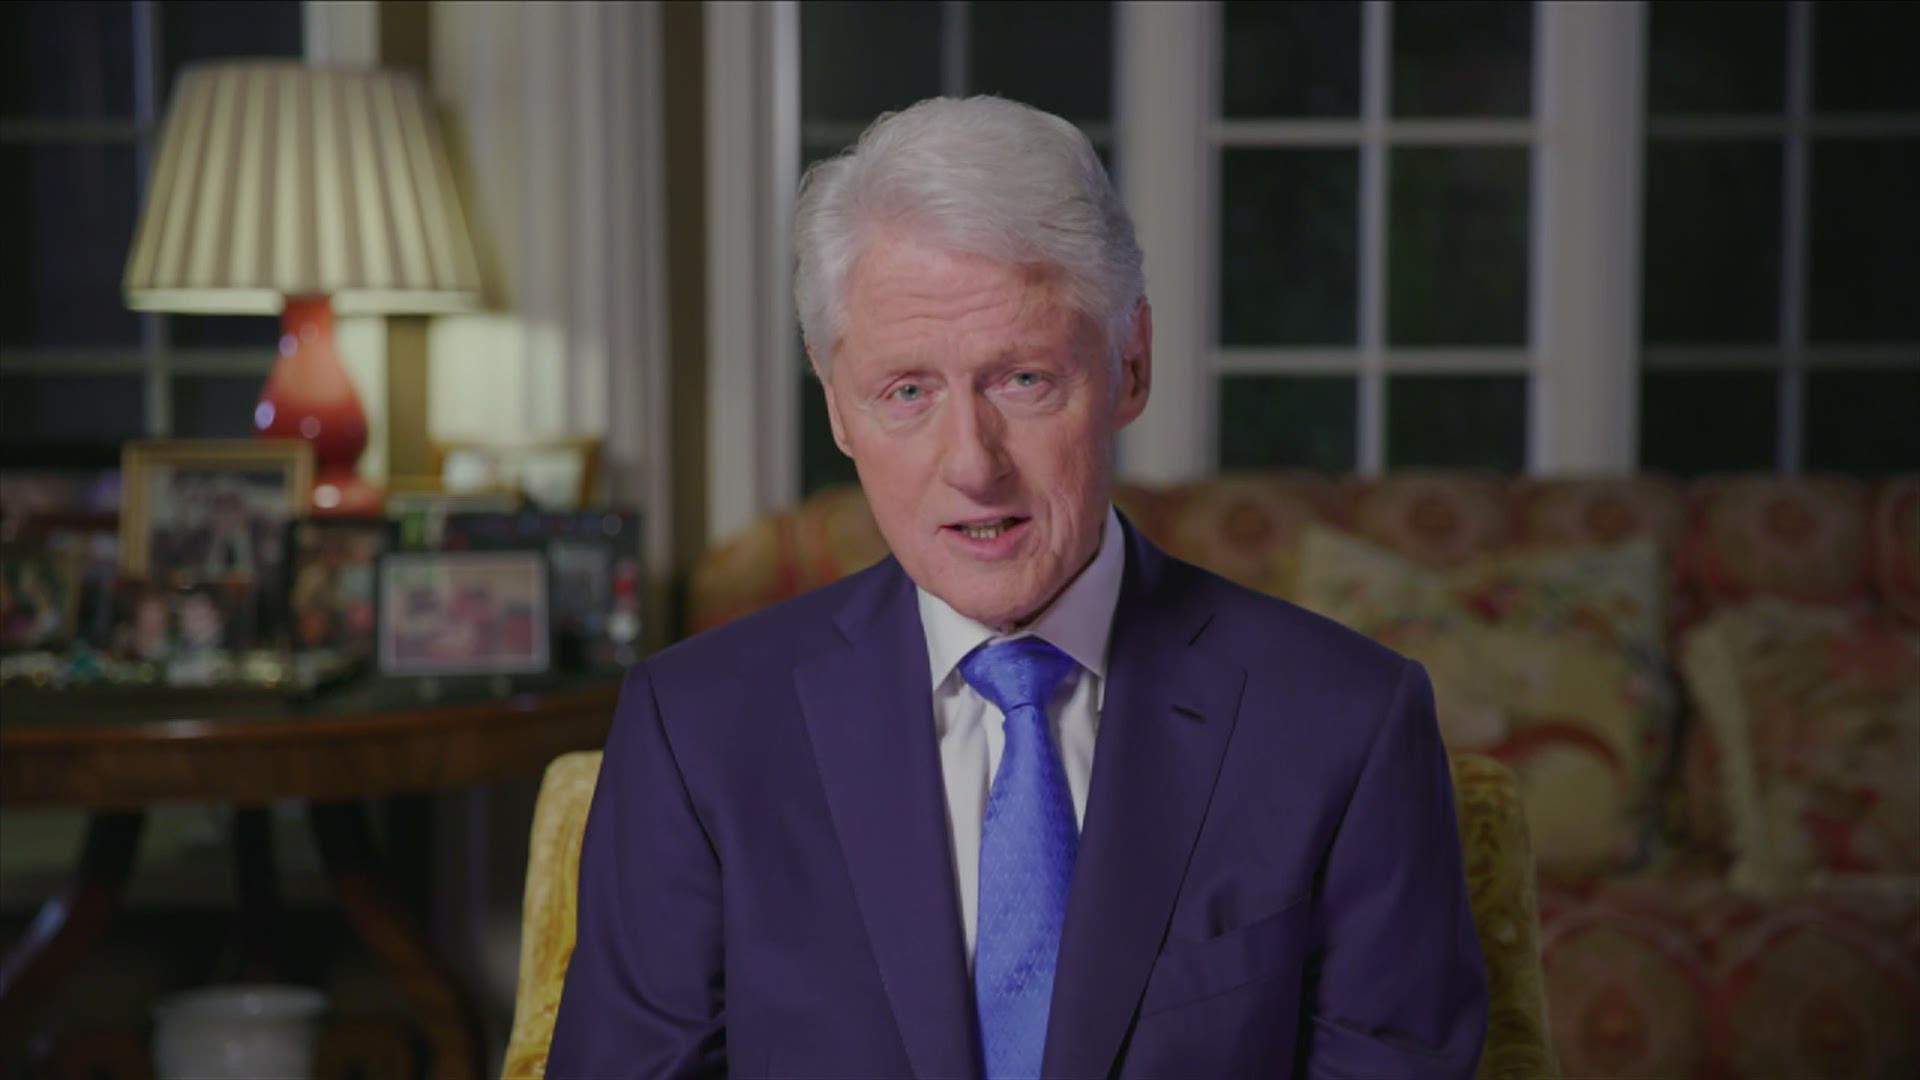 Former President Bill Clinton delivered a speech to promote Joe Biden at the Democratic National Convention.